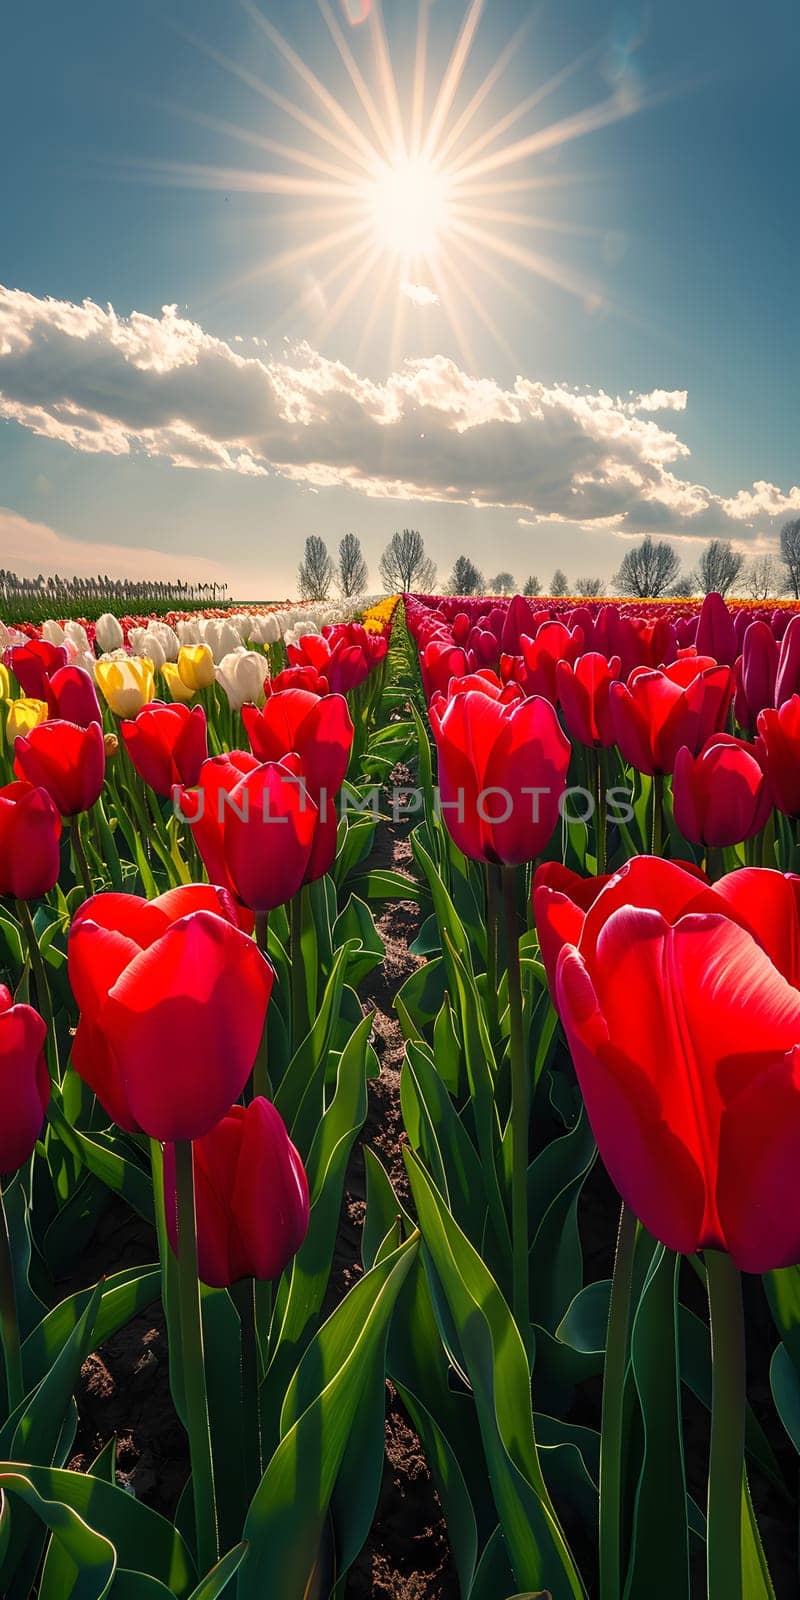 Vivid red and yellow tulips under sunlit sky in natural landscape by Nadtochiy